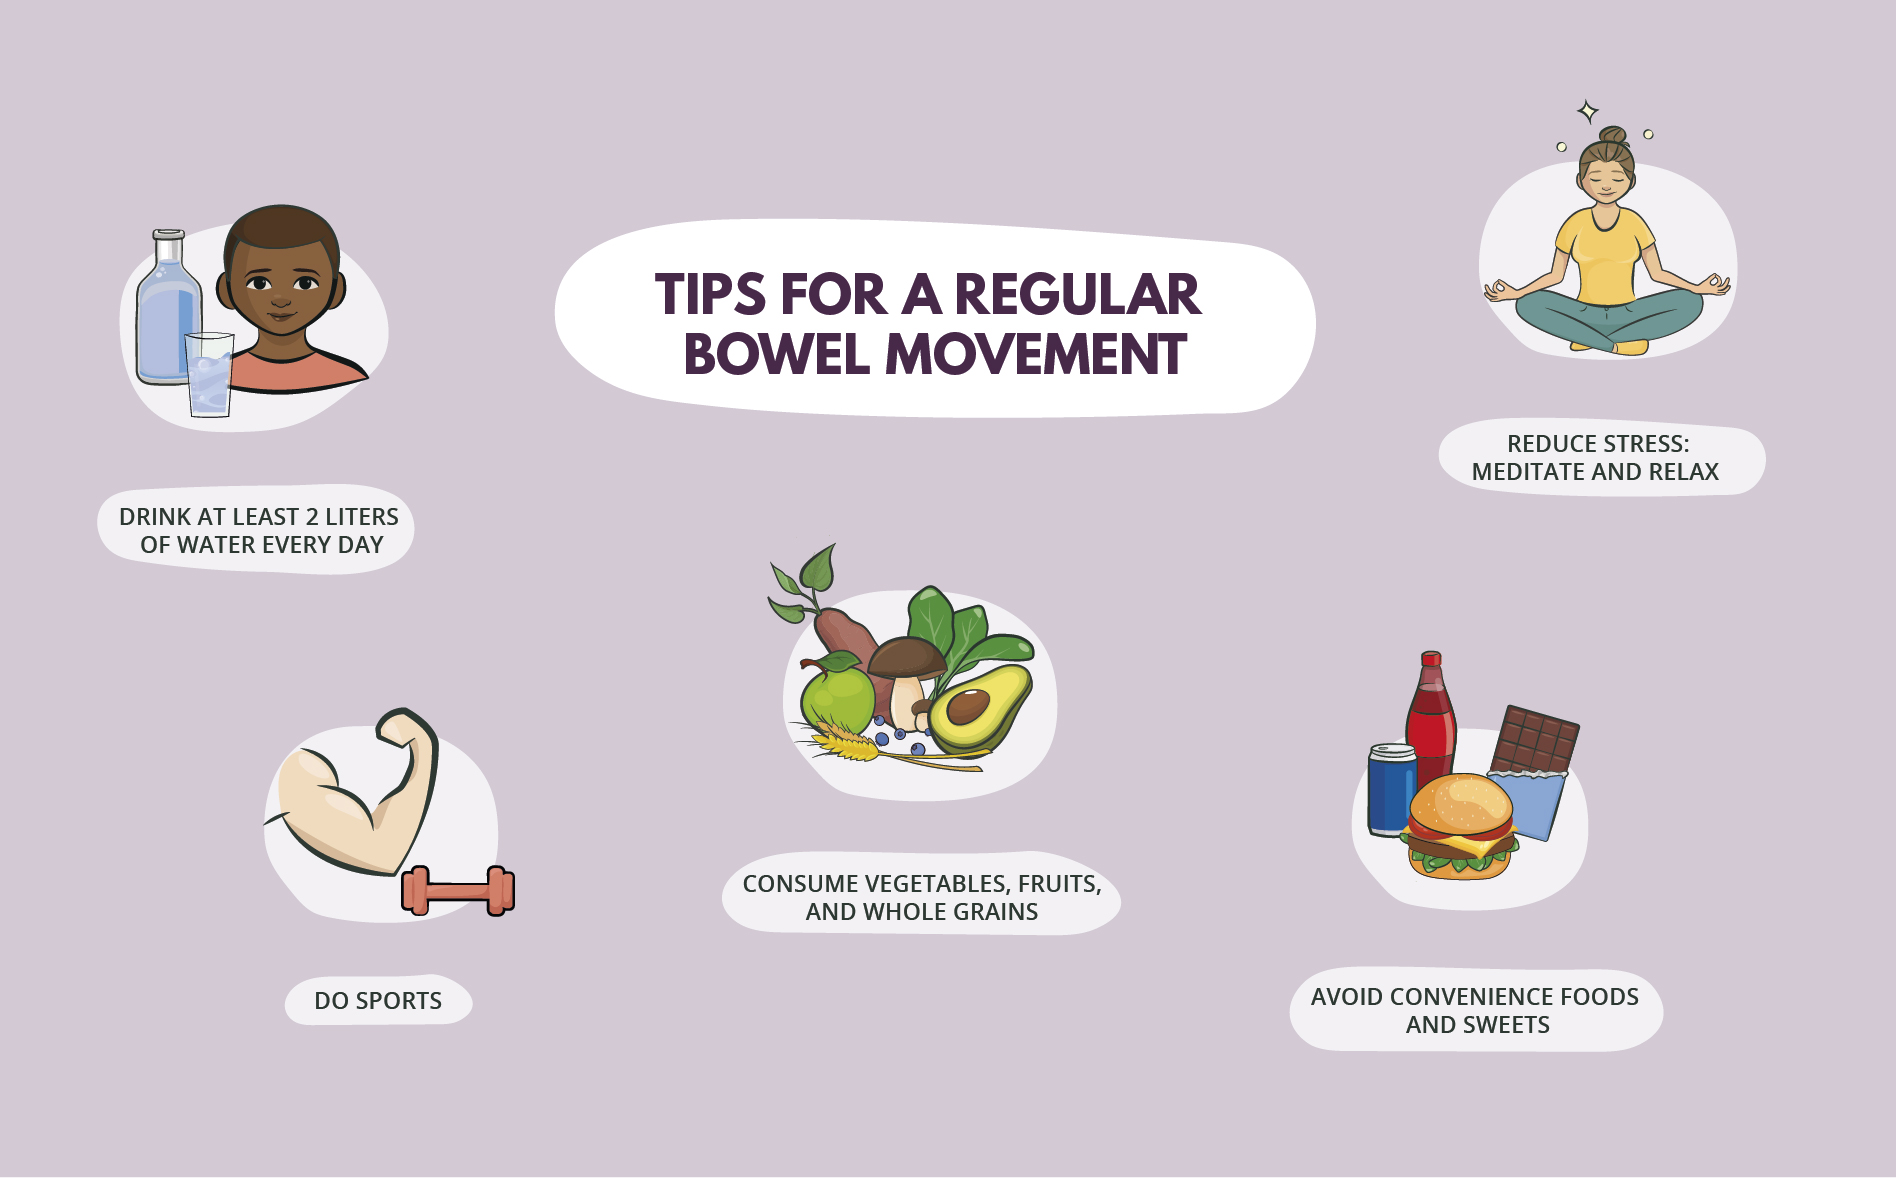 Tips for maintaining a regular bowel movement